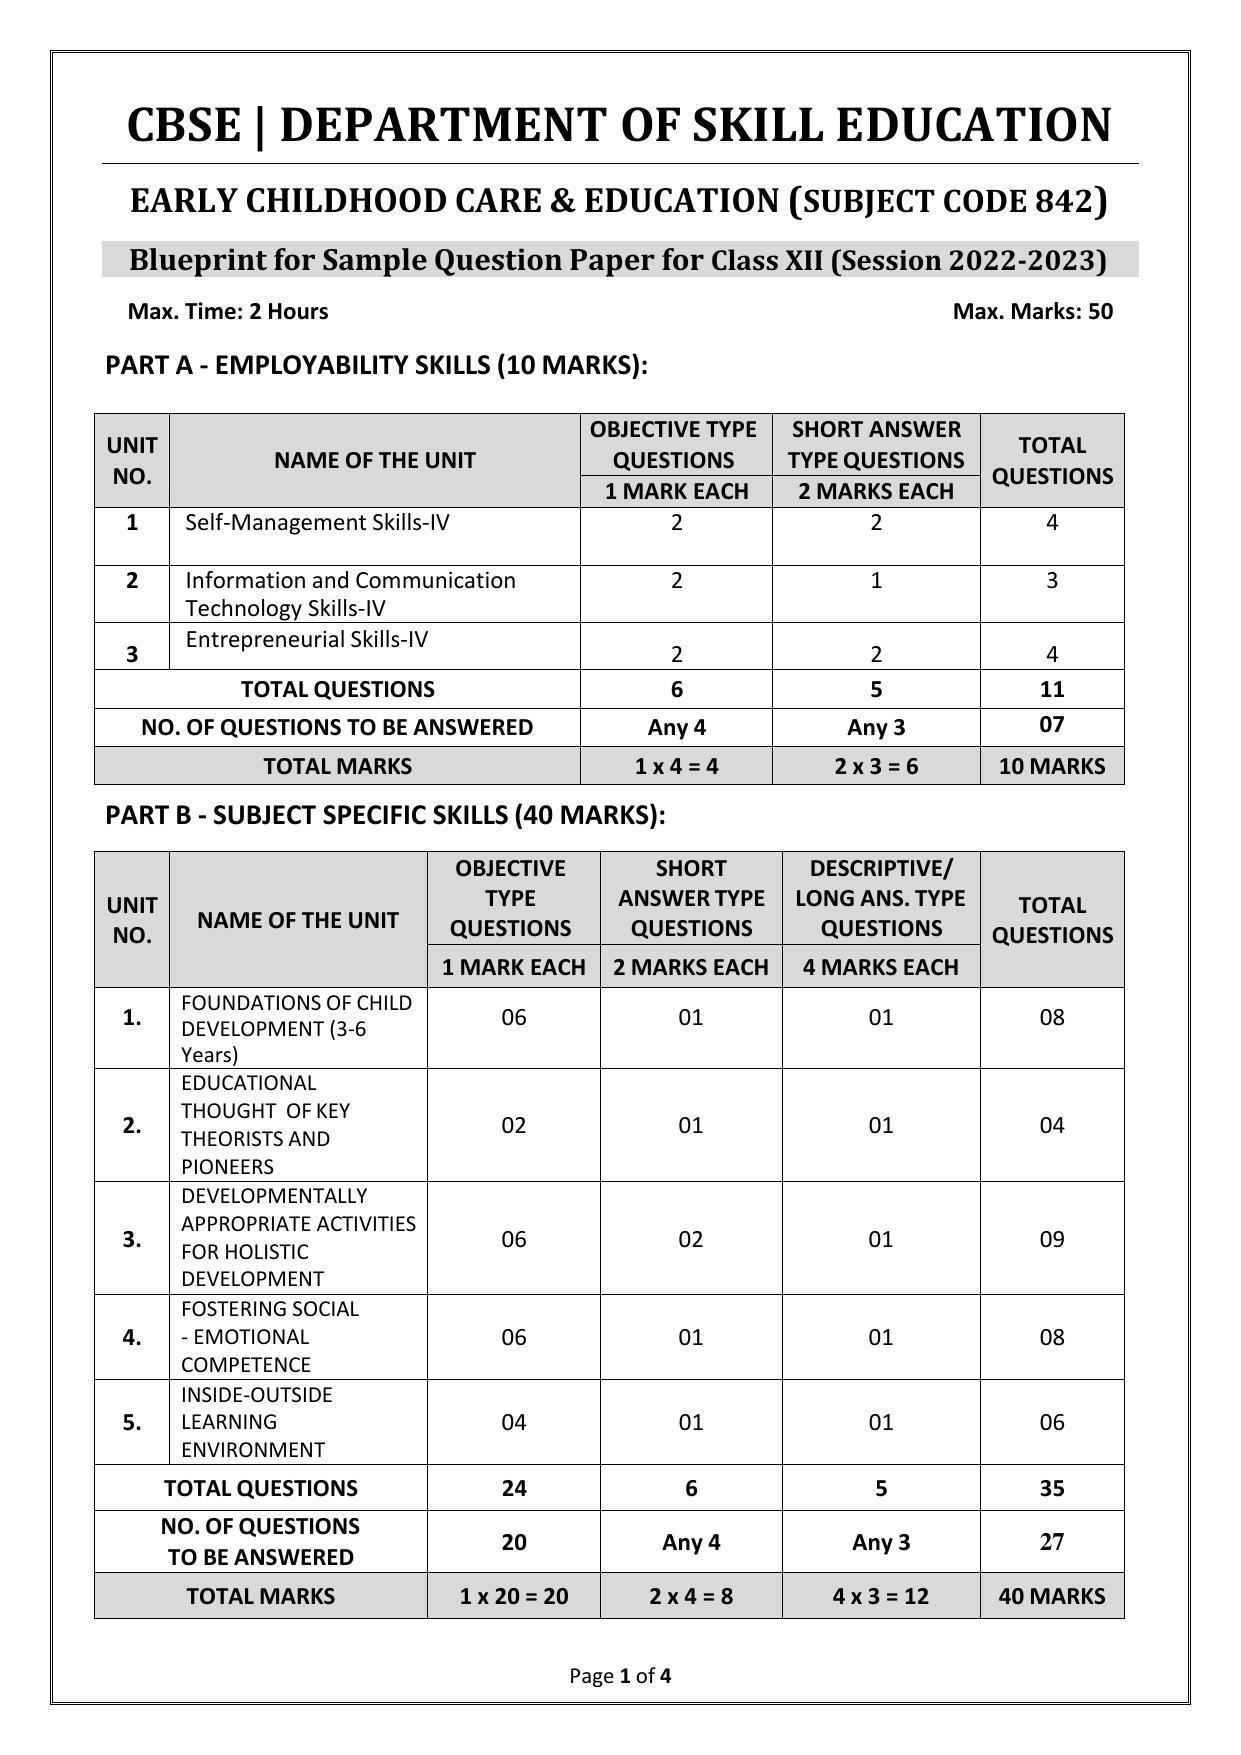 CBSE Class 12 Early Childhood Care & Education (Skill Education) Sample Papers 2023 - Page 1